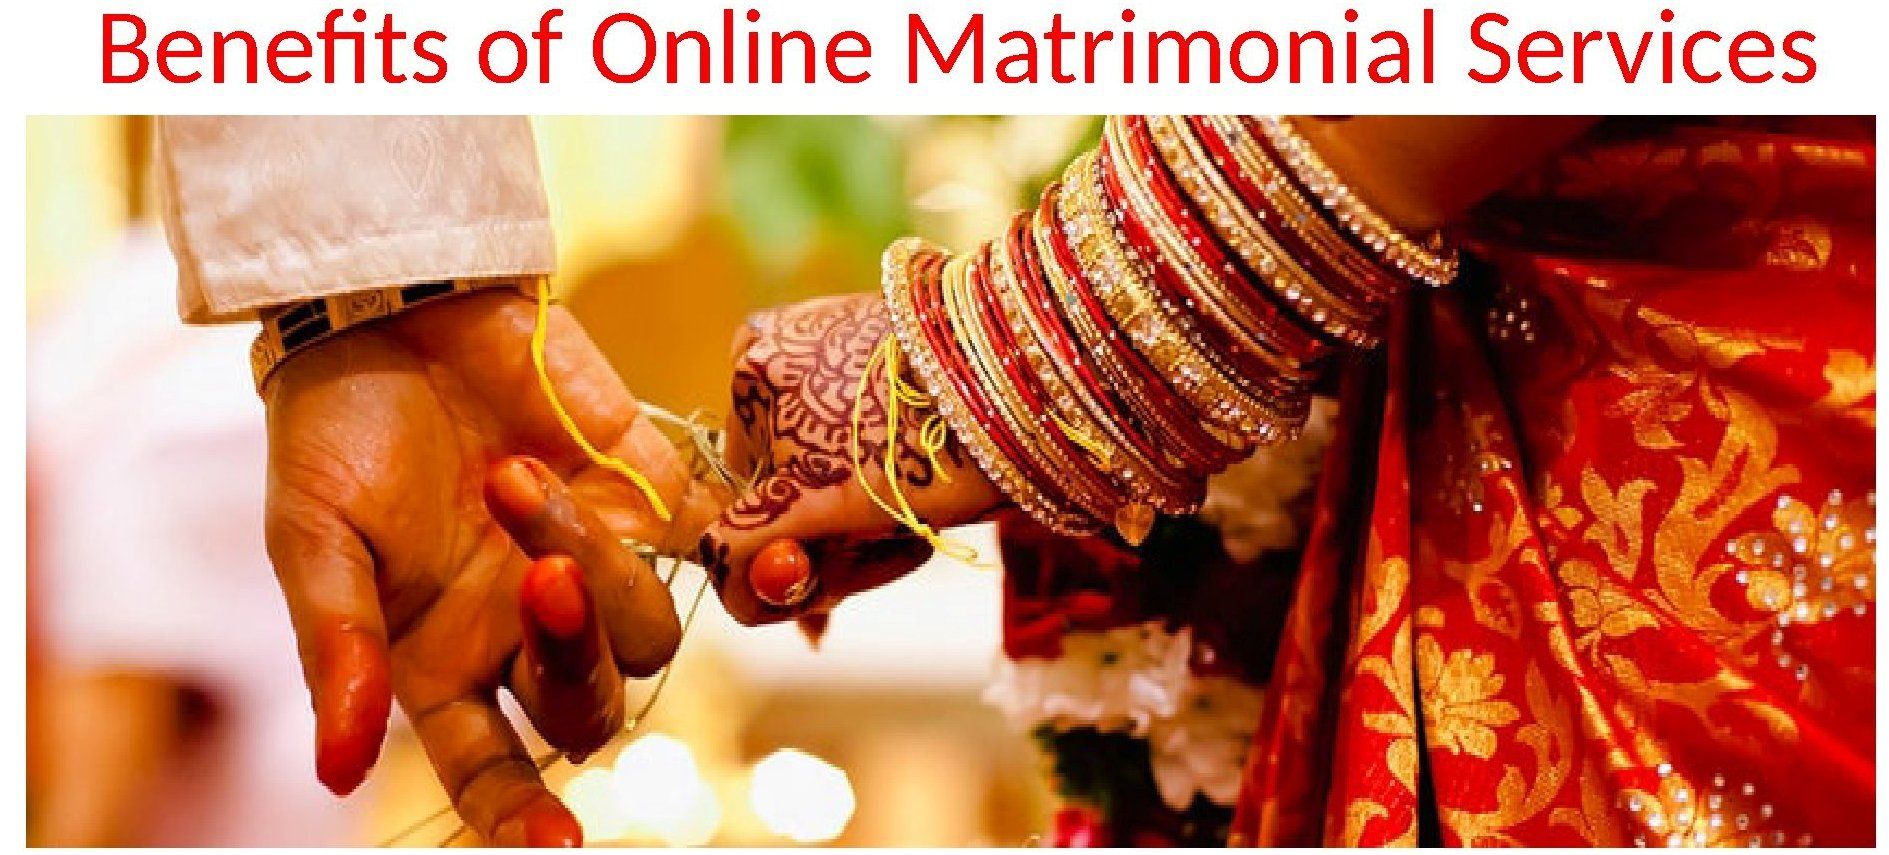 What are the major Benefits of Online Matrimonial Services?